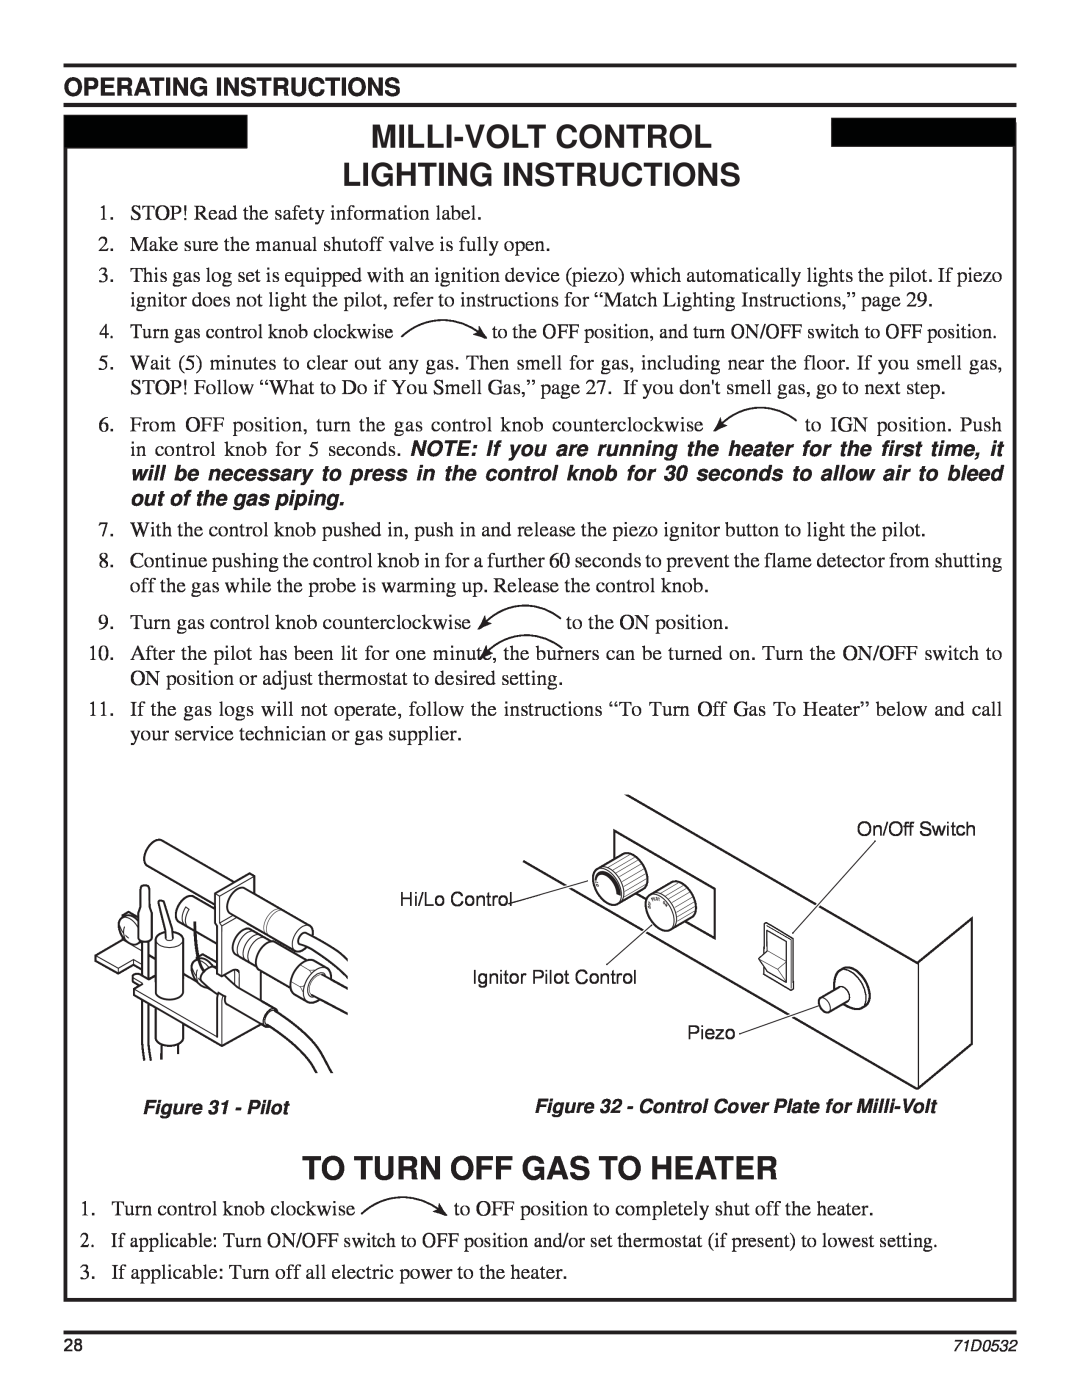 Monessen Hearth DFS42PVC manual Milli-Voltcontrol Lighting Instructions, To Turn Off Gas To Heater, Operating Instructions 